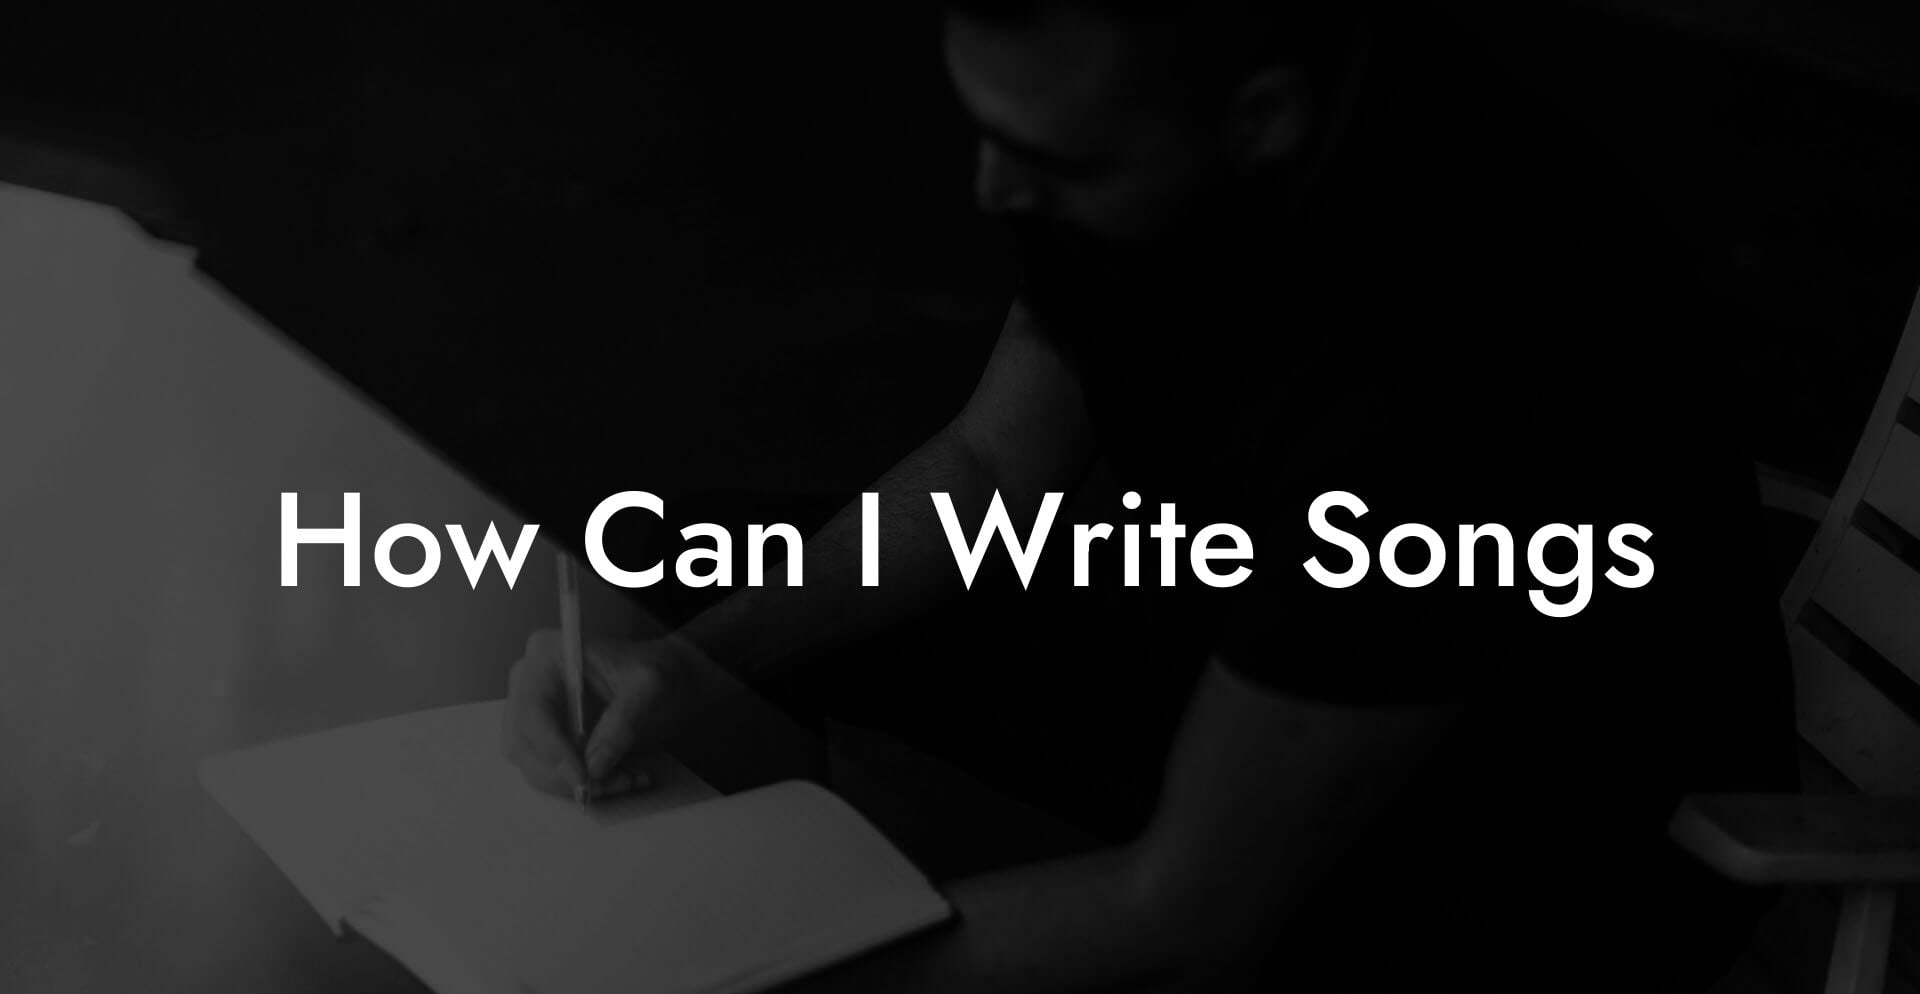 how can i write songs lyric assistant